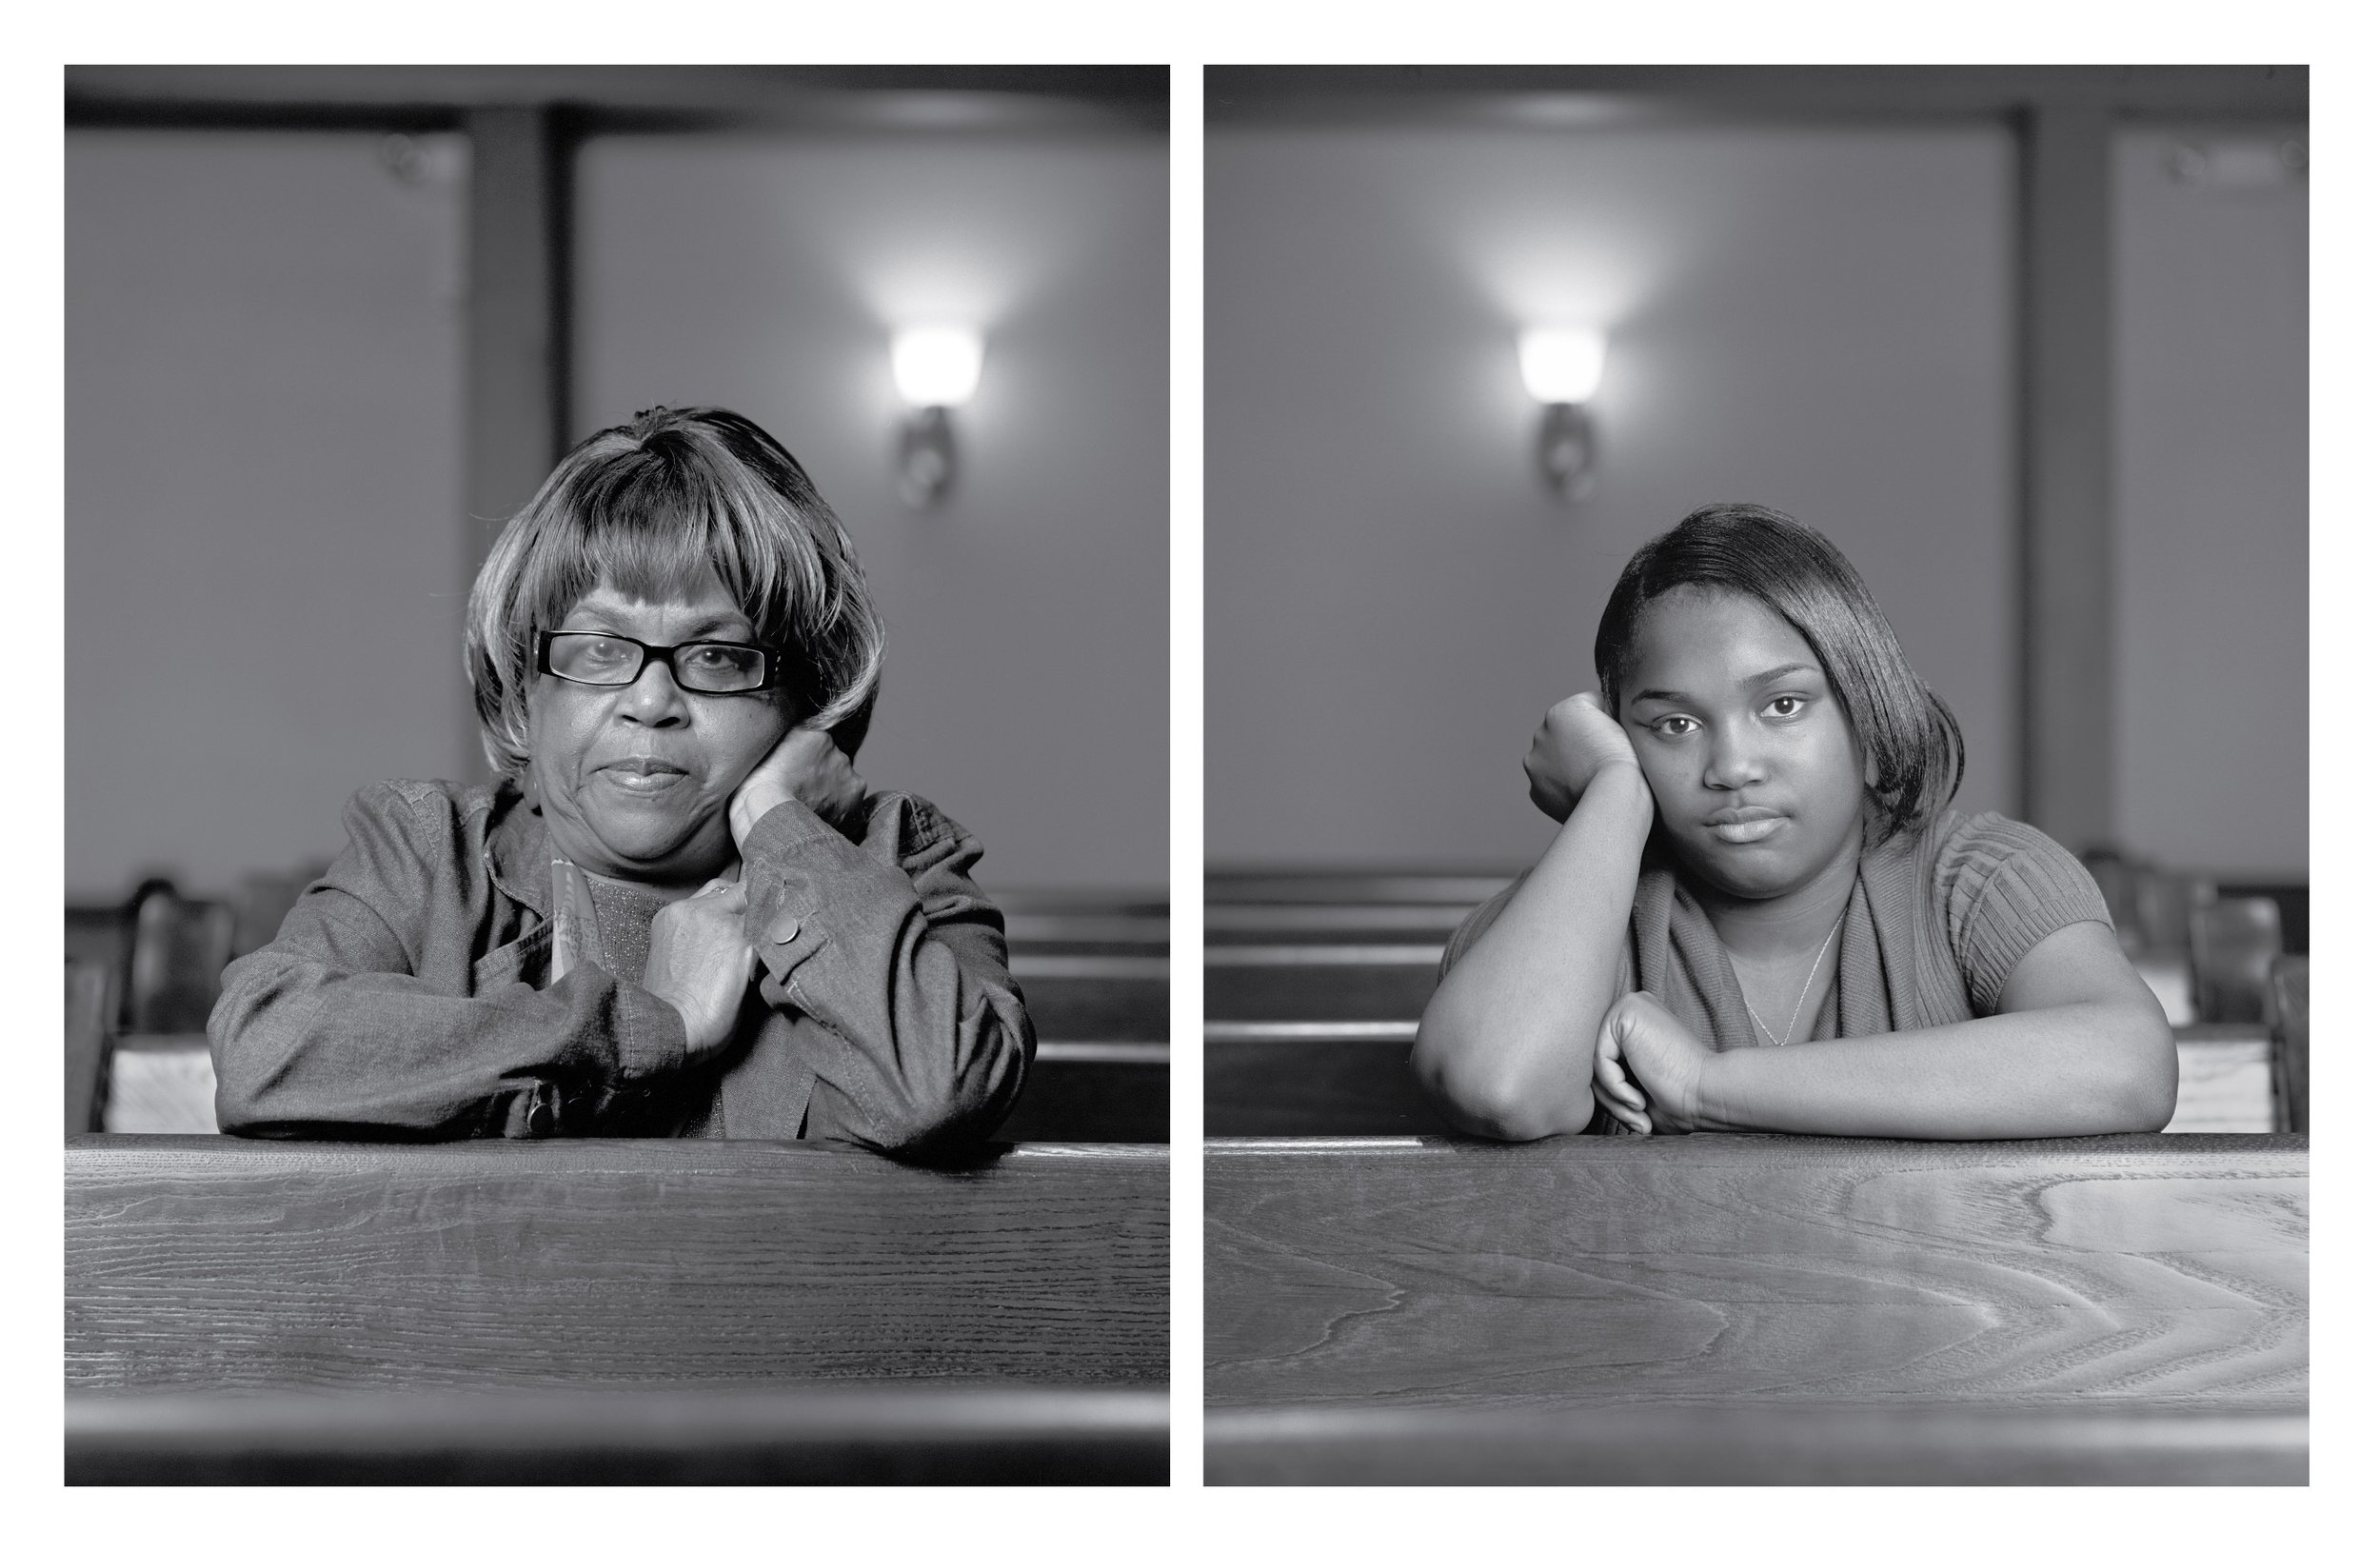 Dawoud Bey (b. 1953), The Birmingham Project_Janice Kemp and Triniti Williams, 2012, archival pigment prints mounted to diabond, edition 2_6. Museum purchase, 2021.4.a-b.jpg